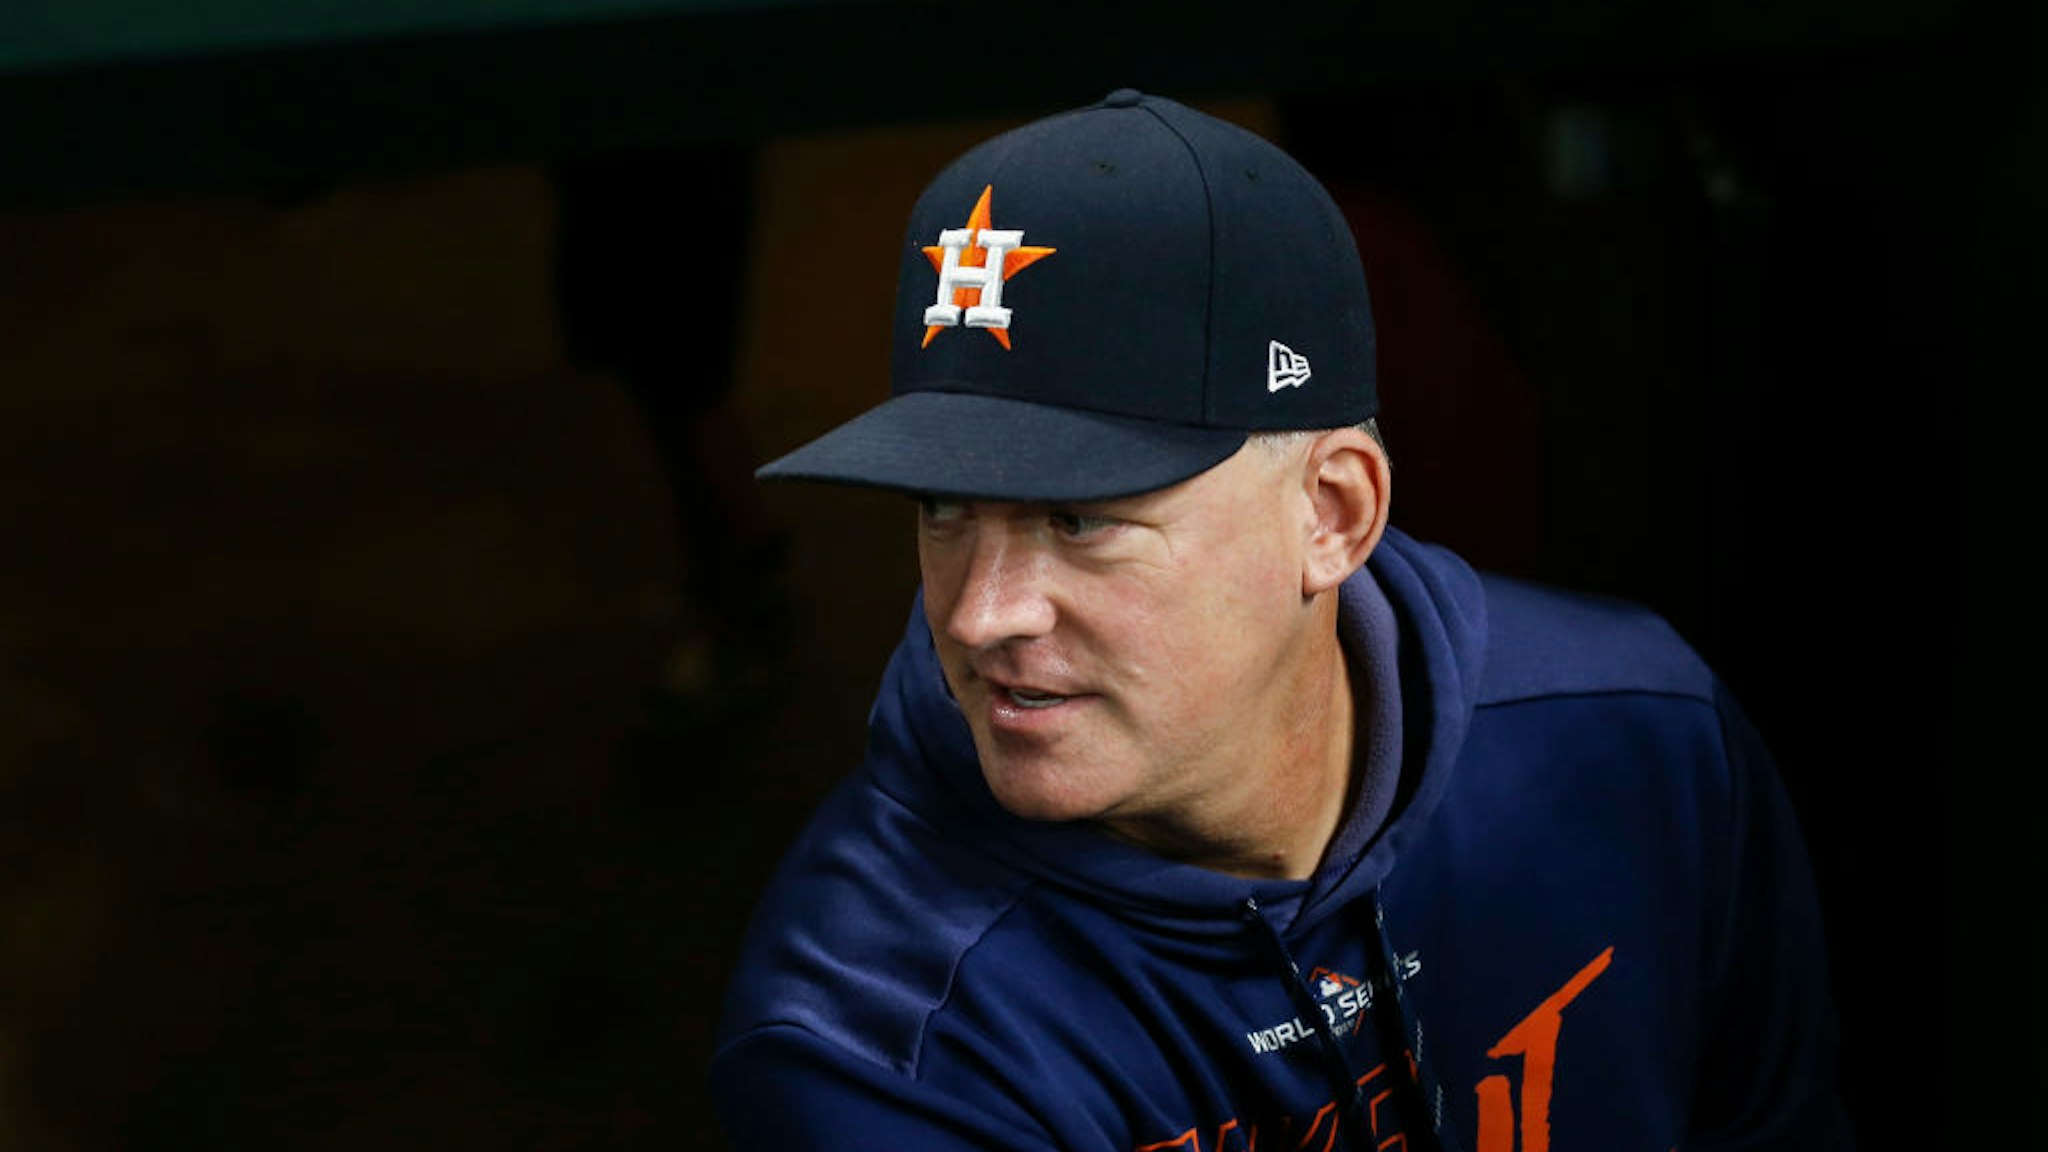 Manager AJ Hinch #14 of the Houston Astros walks into the dugout before Game Seven of the 2019 World Series against the Washington Nationals at Minute Maid Park on October 30, 2019 in Houston, Texas.